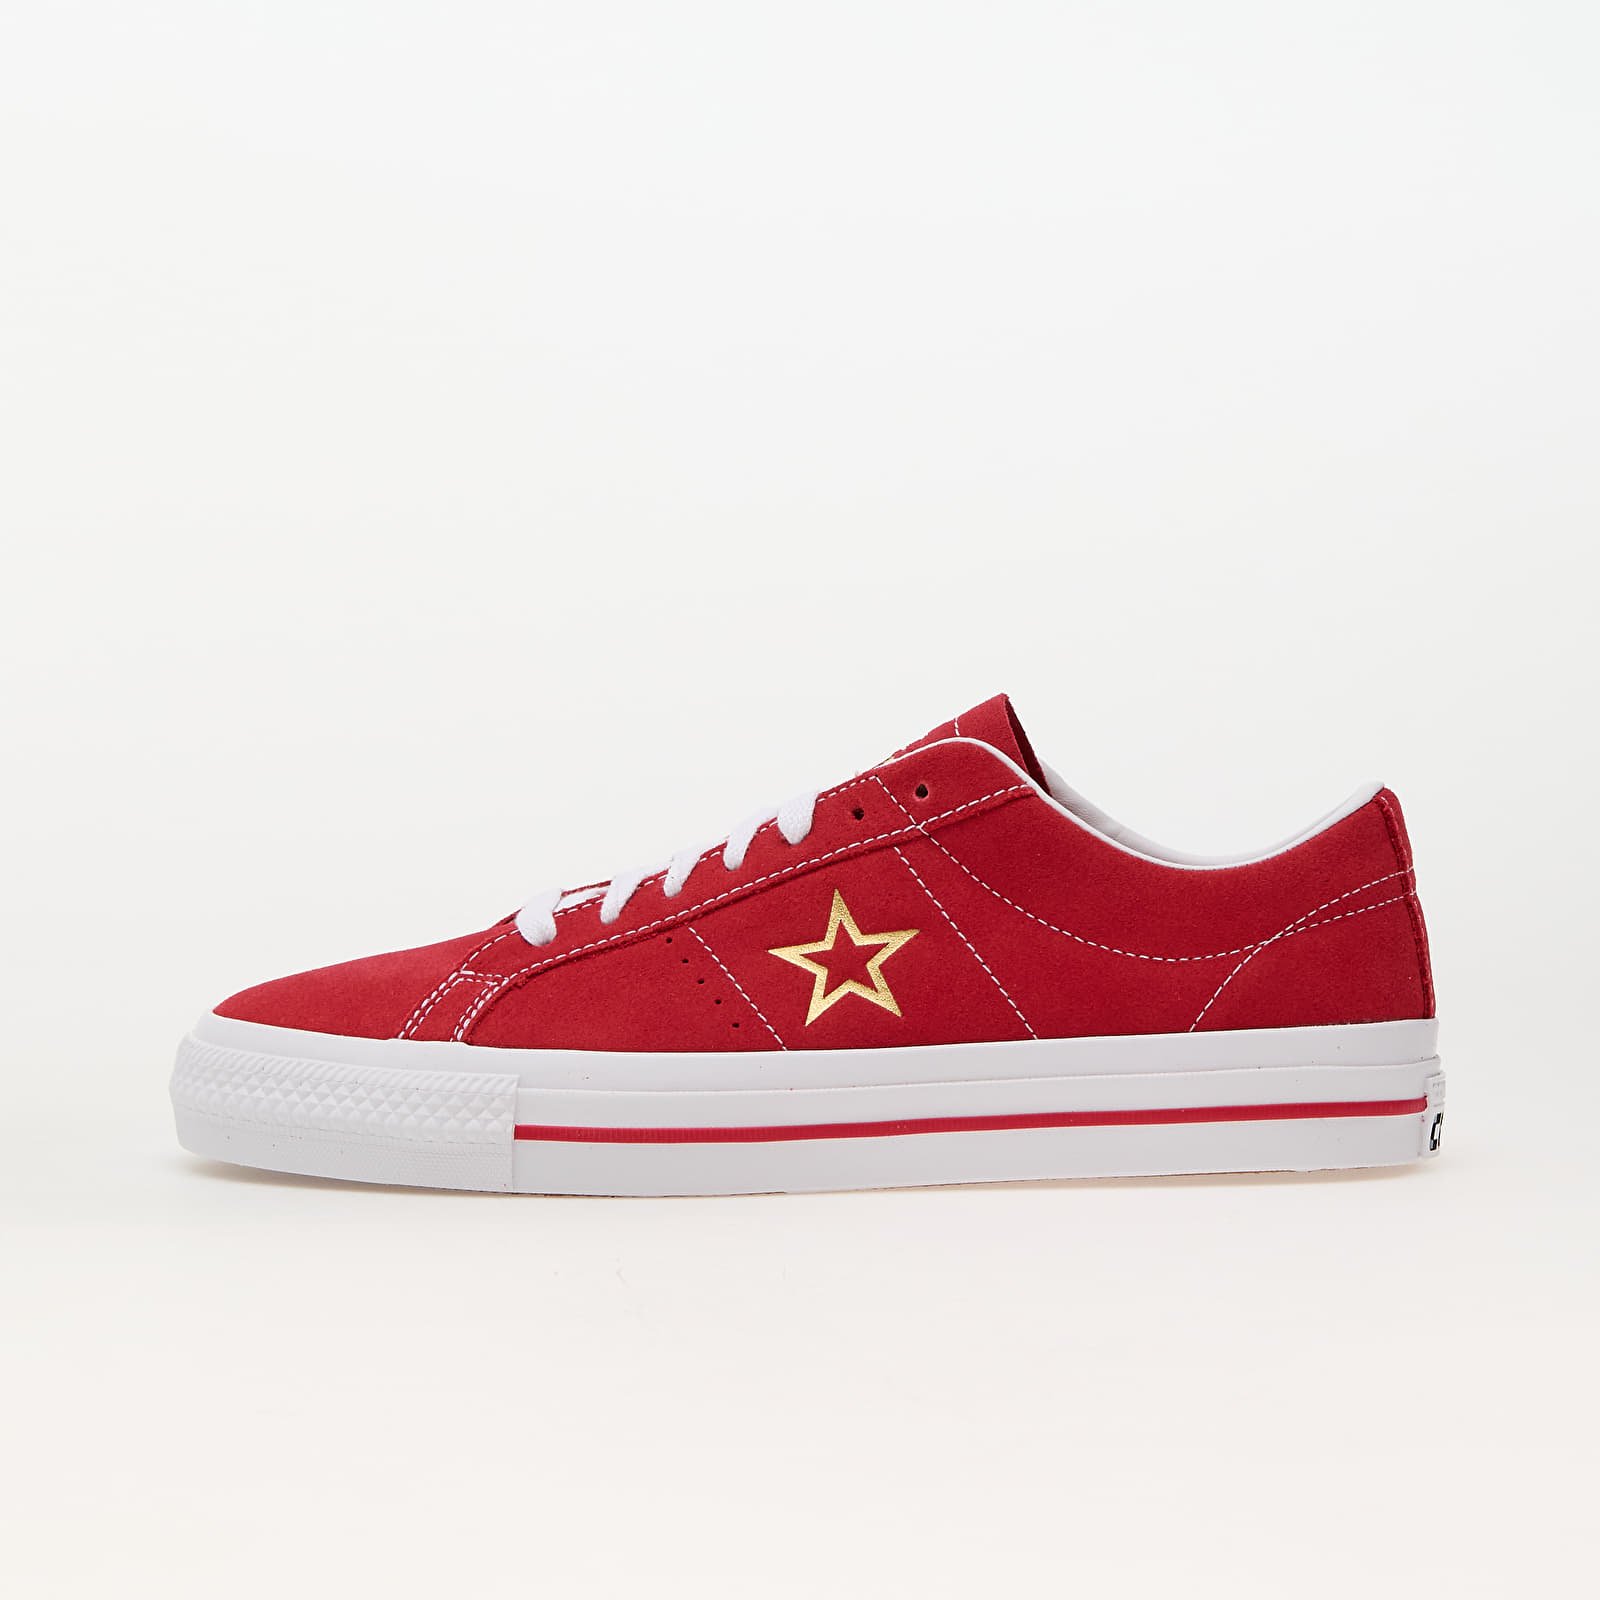 Men's shoes Converse One Star Pro Suede Varsity Red/ White/ Gold